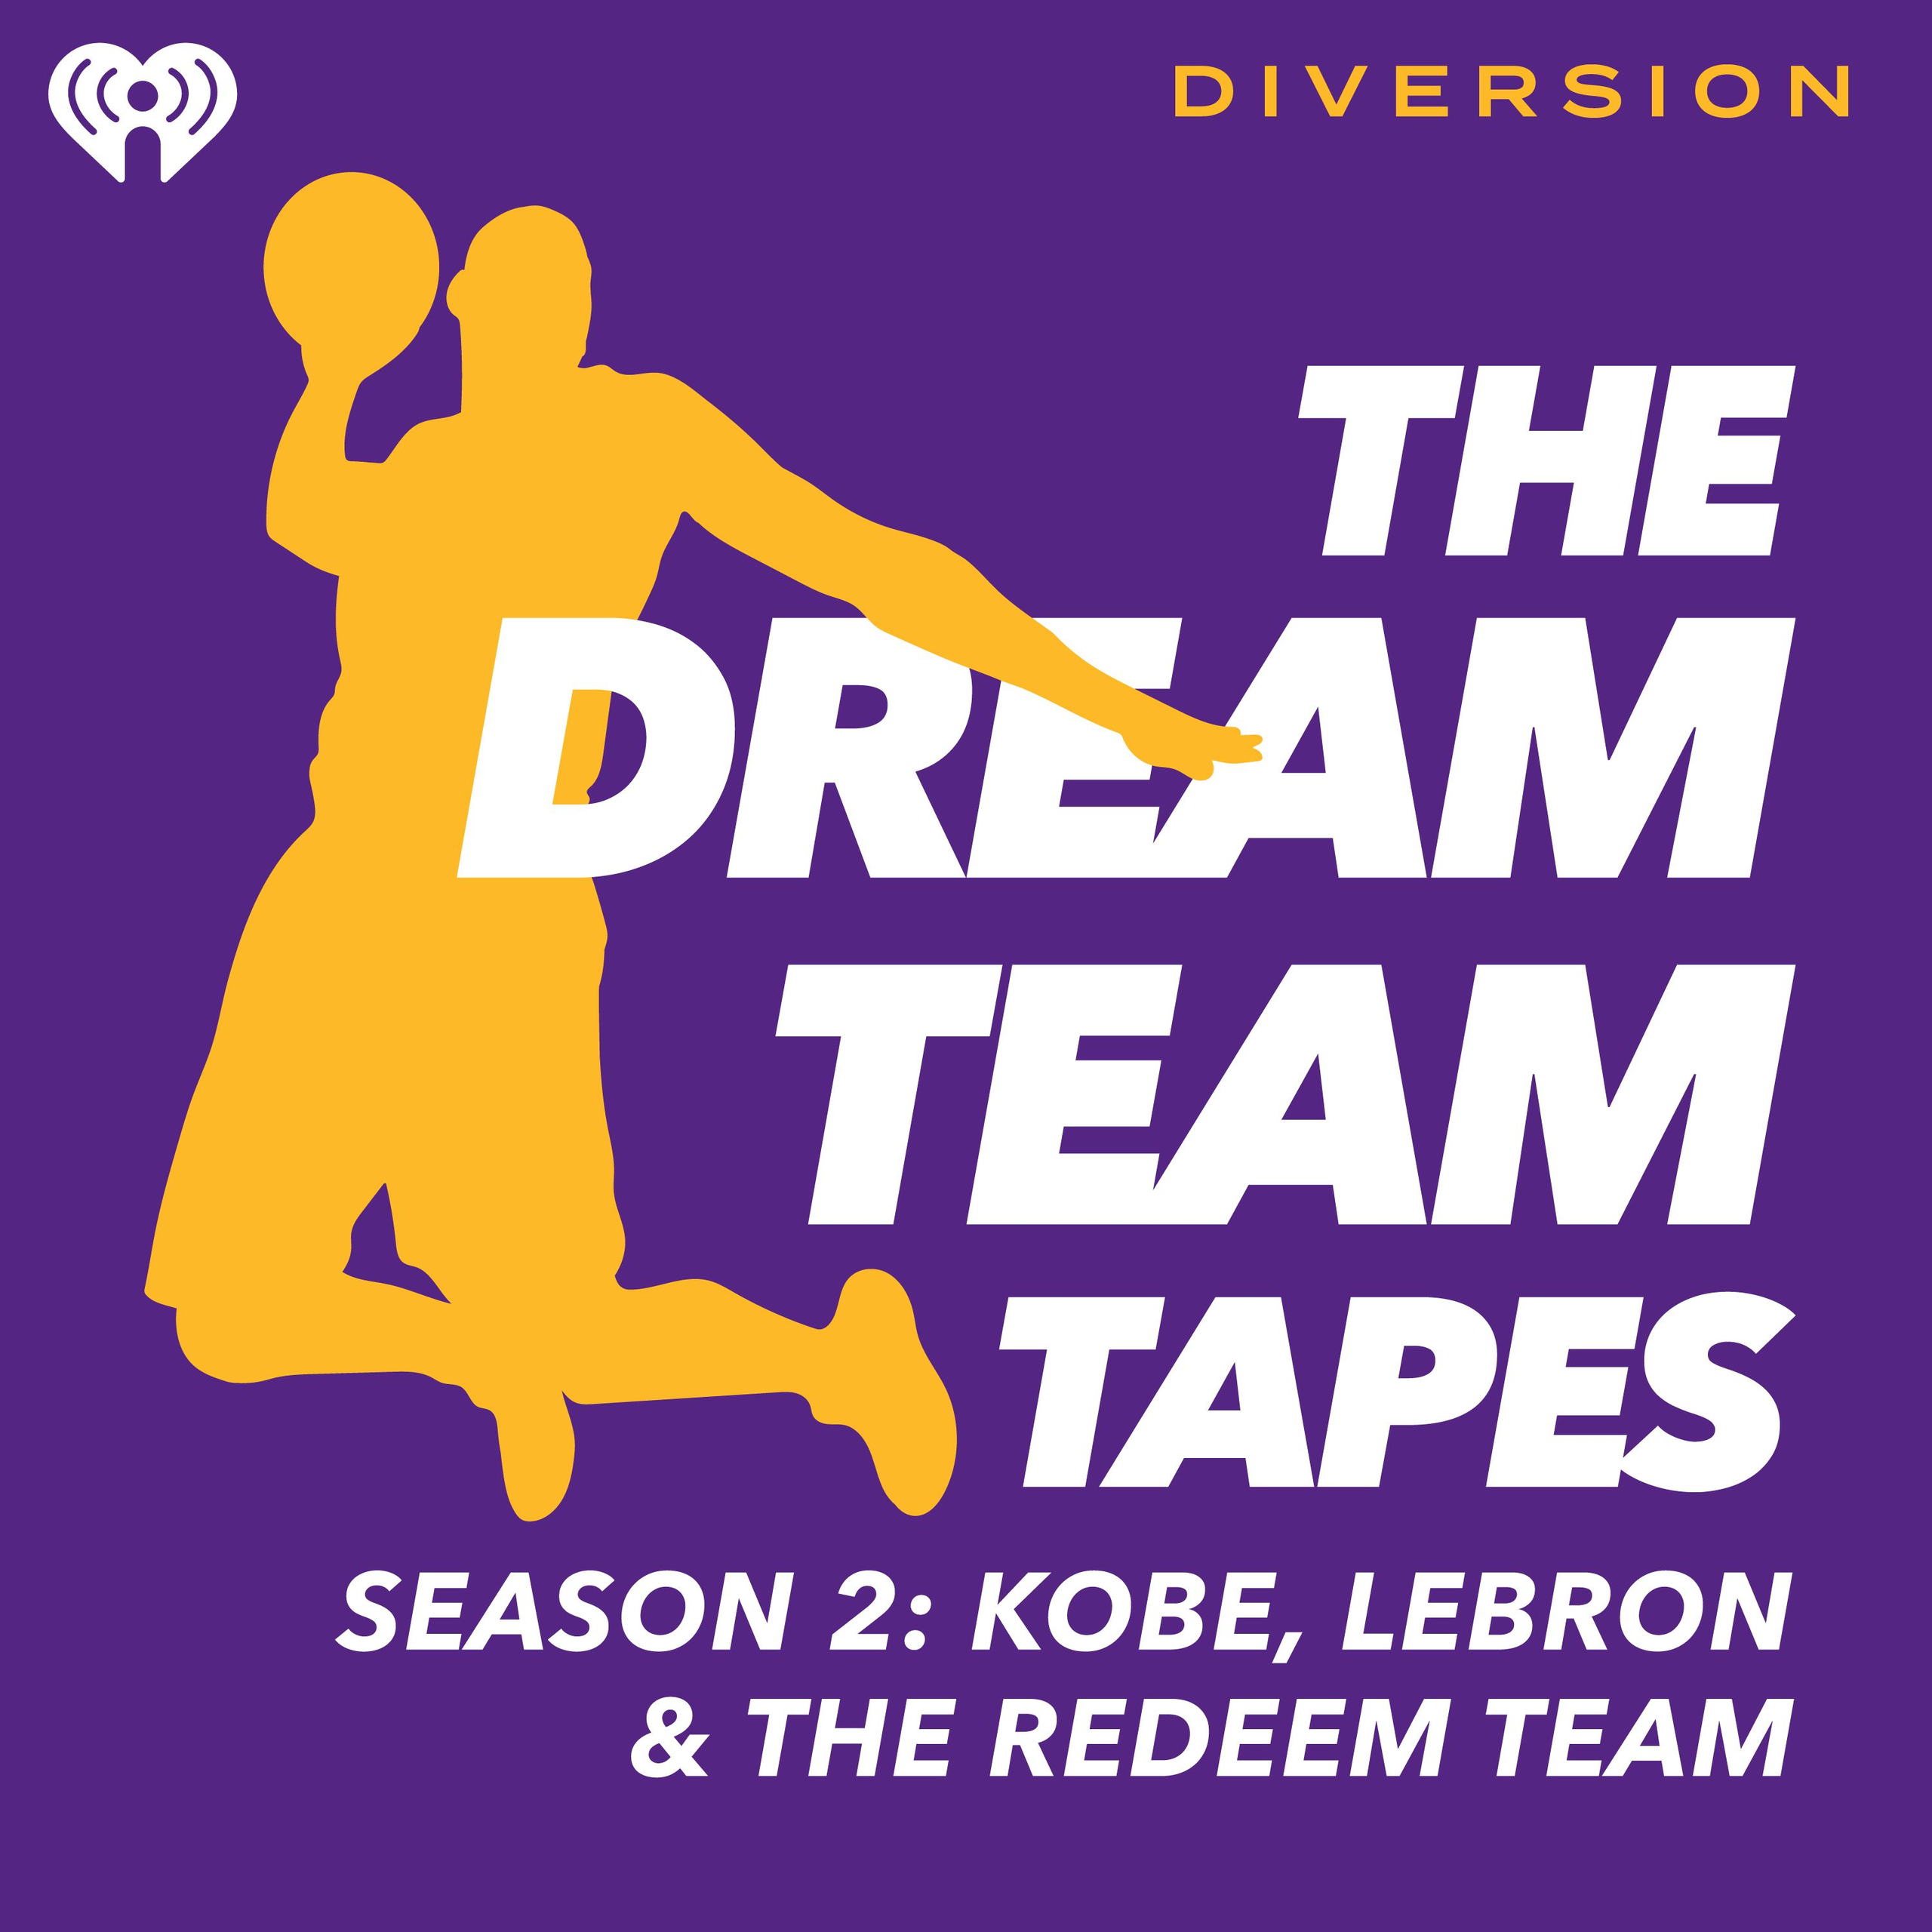 Jerry Colangelo On Building The 2008 Redeem Team & The Secret Brainstorm Meeting He Held w/Michael Jordan, Larry Bird, Jerry West, Dean Smith, & Others That Lead To The Hiring Of Coach K